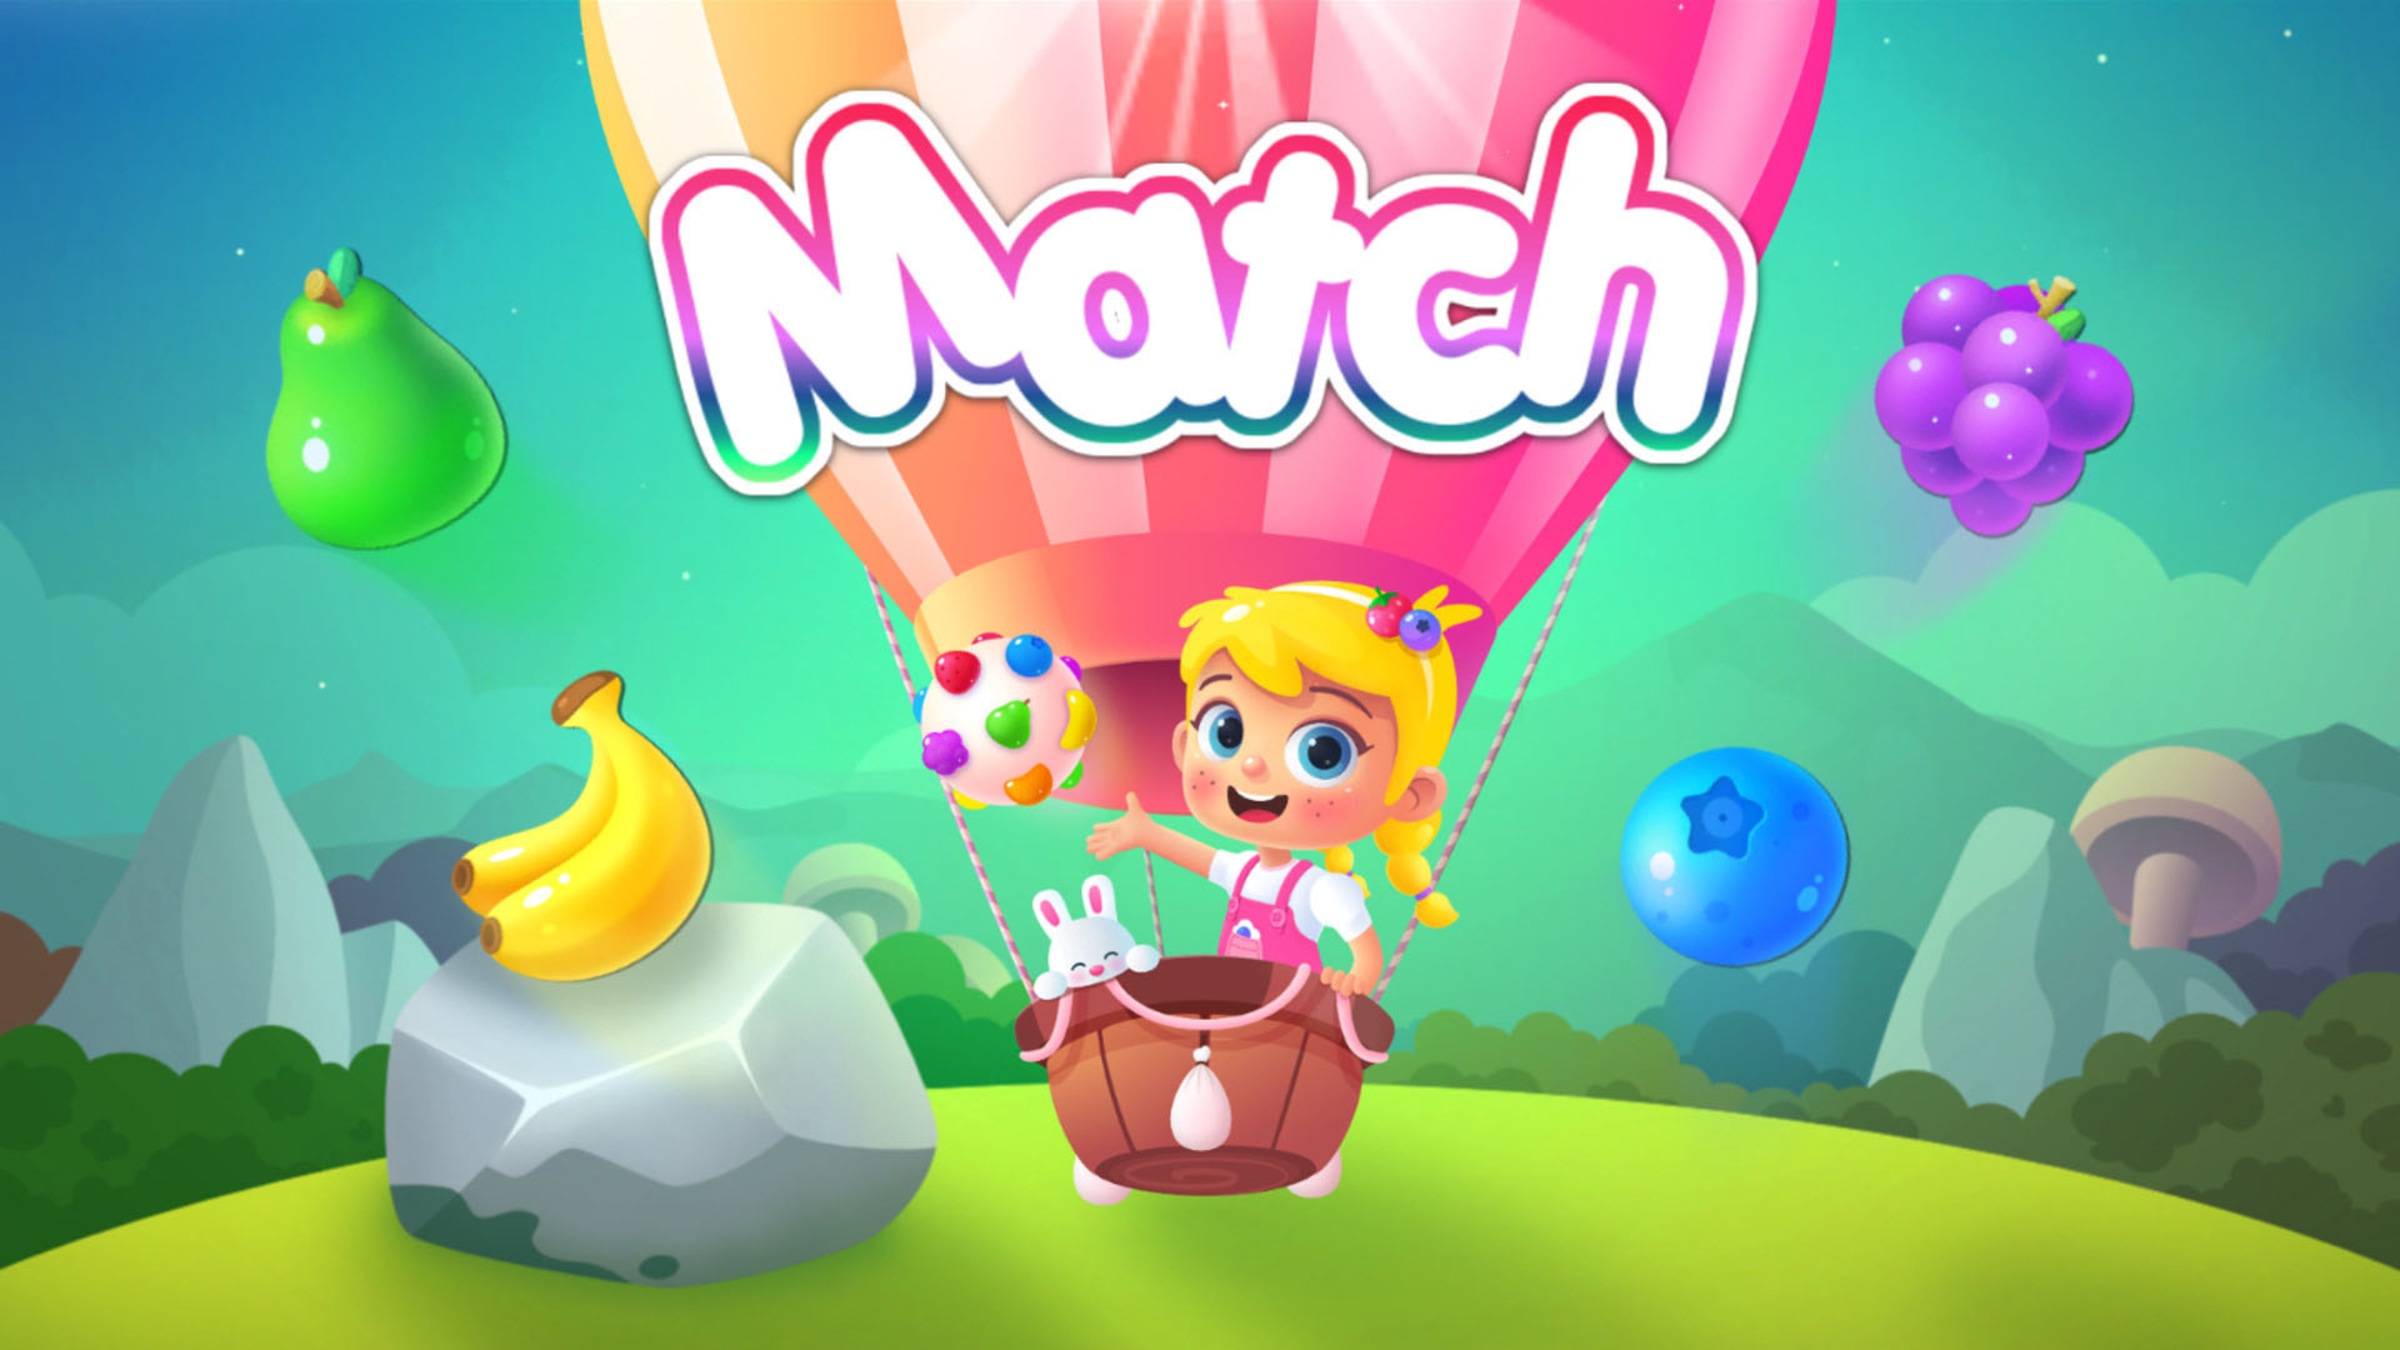 Twist & Match for Nintendo Switch - Nintendo Official Site